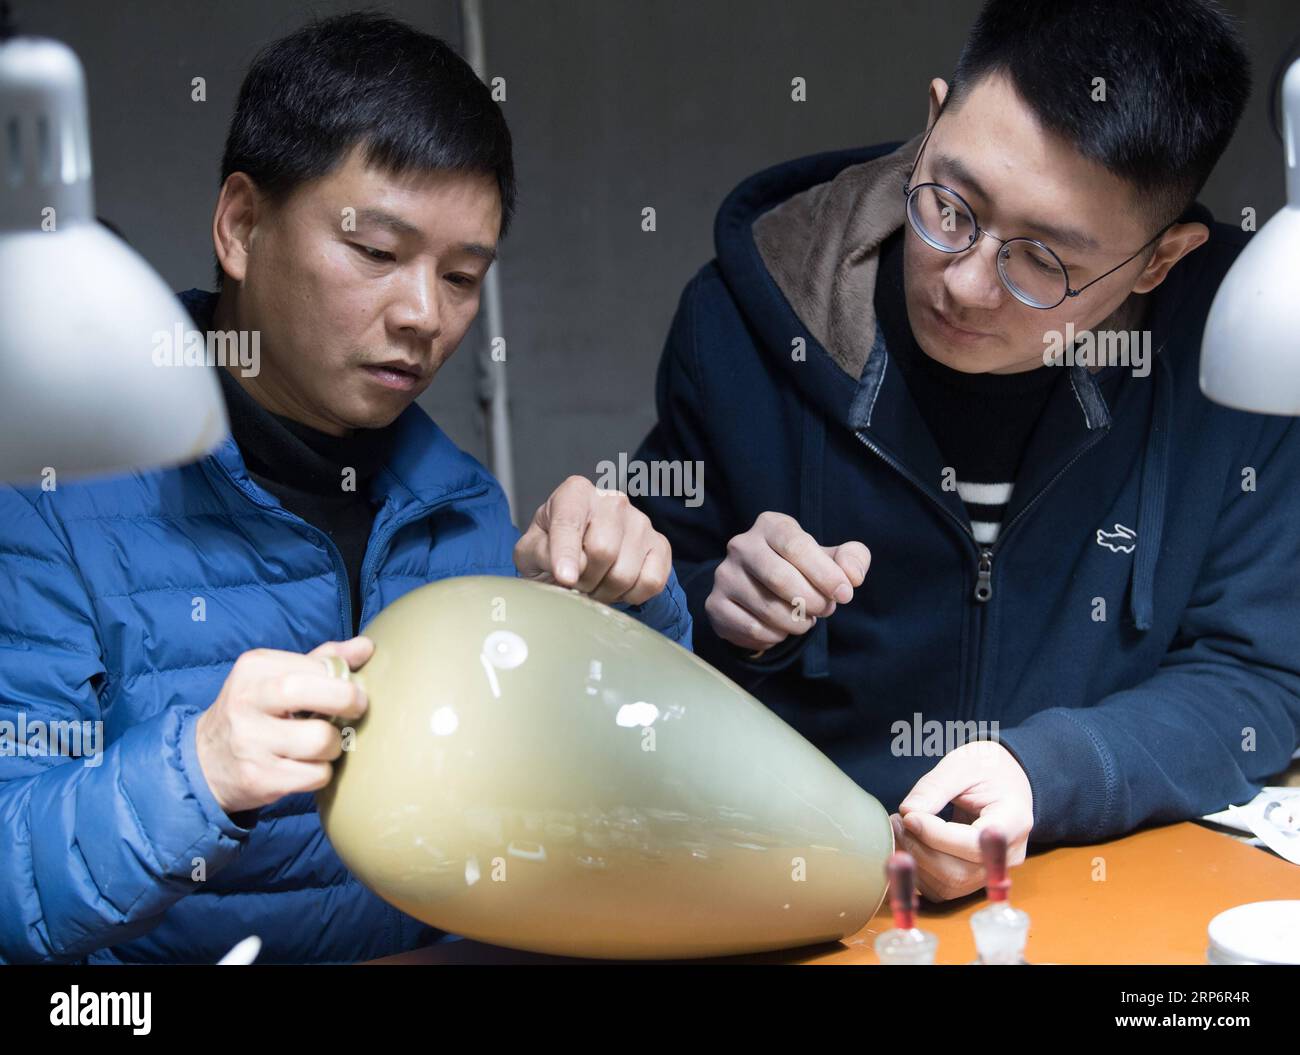 (190119) -- LONGQUAN, Jan. 19, 2019 (Xinhua) -- Wu Rongqiang (L) discusses the repair details with a celadon artist at his studio in Niutouling Village, Longquan City of east China s Zhejiang Province, Jan. 15, 2019. Wu Rongqiang, a Longquan native aged 45, started exploring traditional lacquer art since 2012. In 2017, he moved his family to an old house deep in the mountains in Longquan in order to do more experiments in lacquer undisturbed. He uses lacquer to repair broken porcelain and to create lacquerware. Also, he experiments on the production of various lacquers. I feel so pleased to re Stock Photo